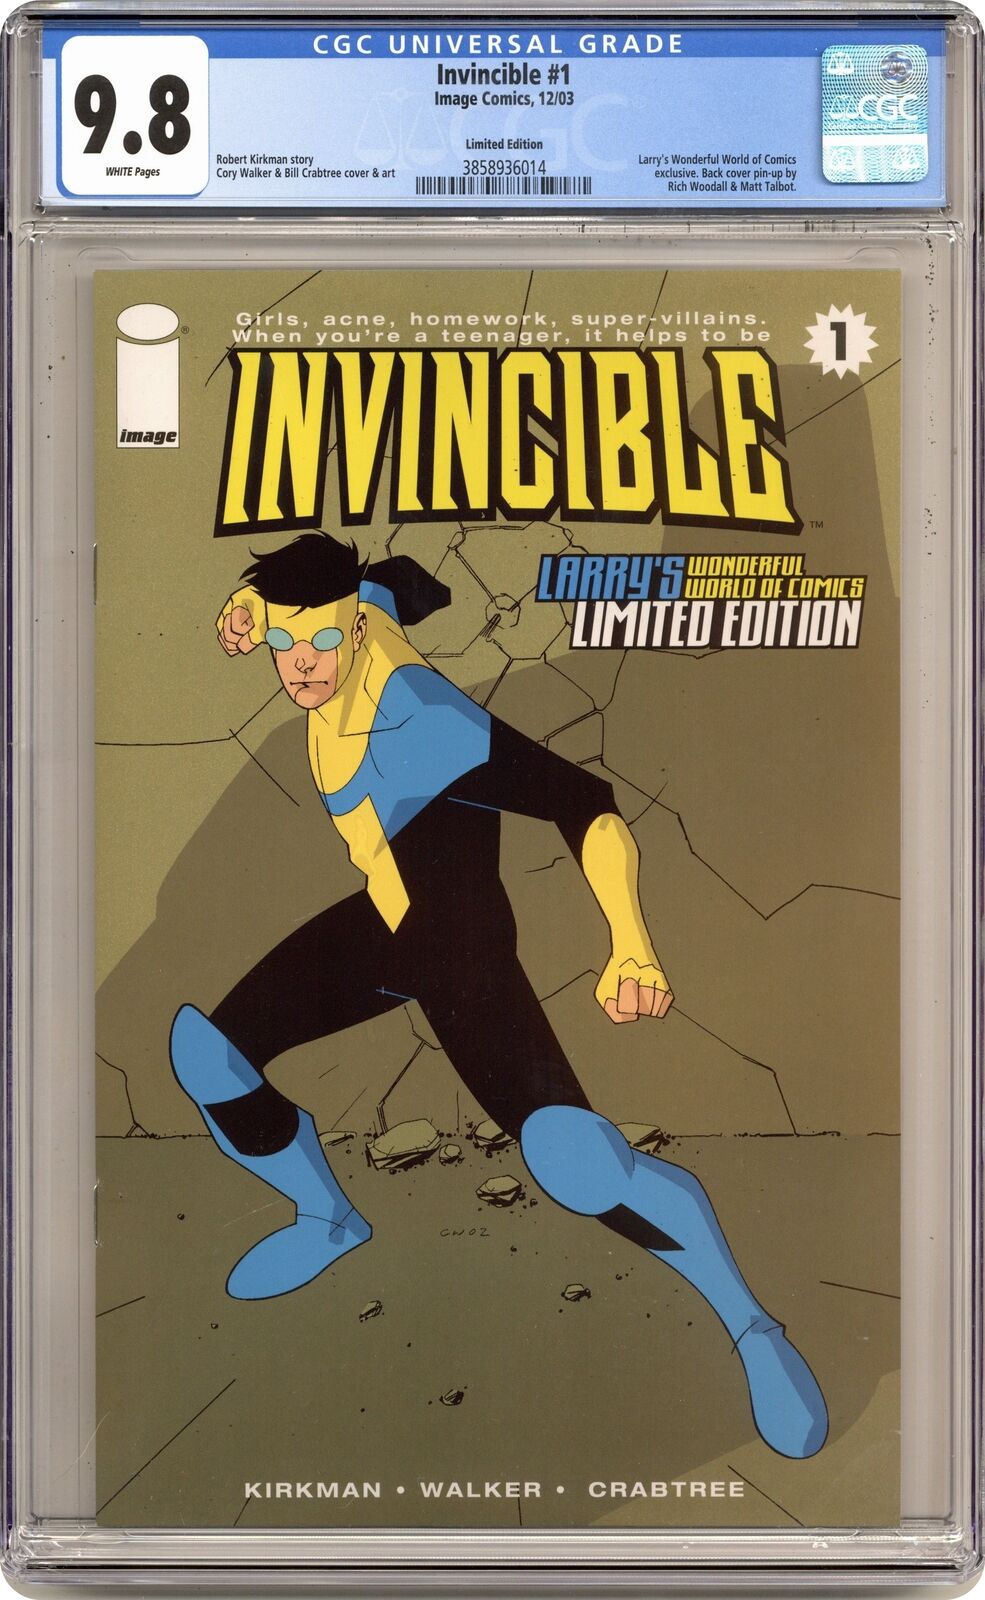 Invincible #1 Limited Edition Variant CGC 9.8 2003 3858936014